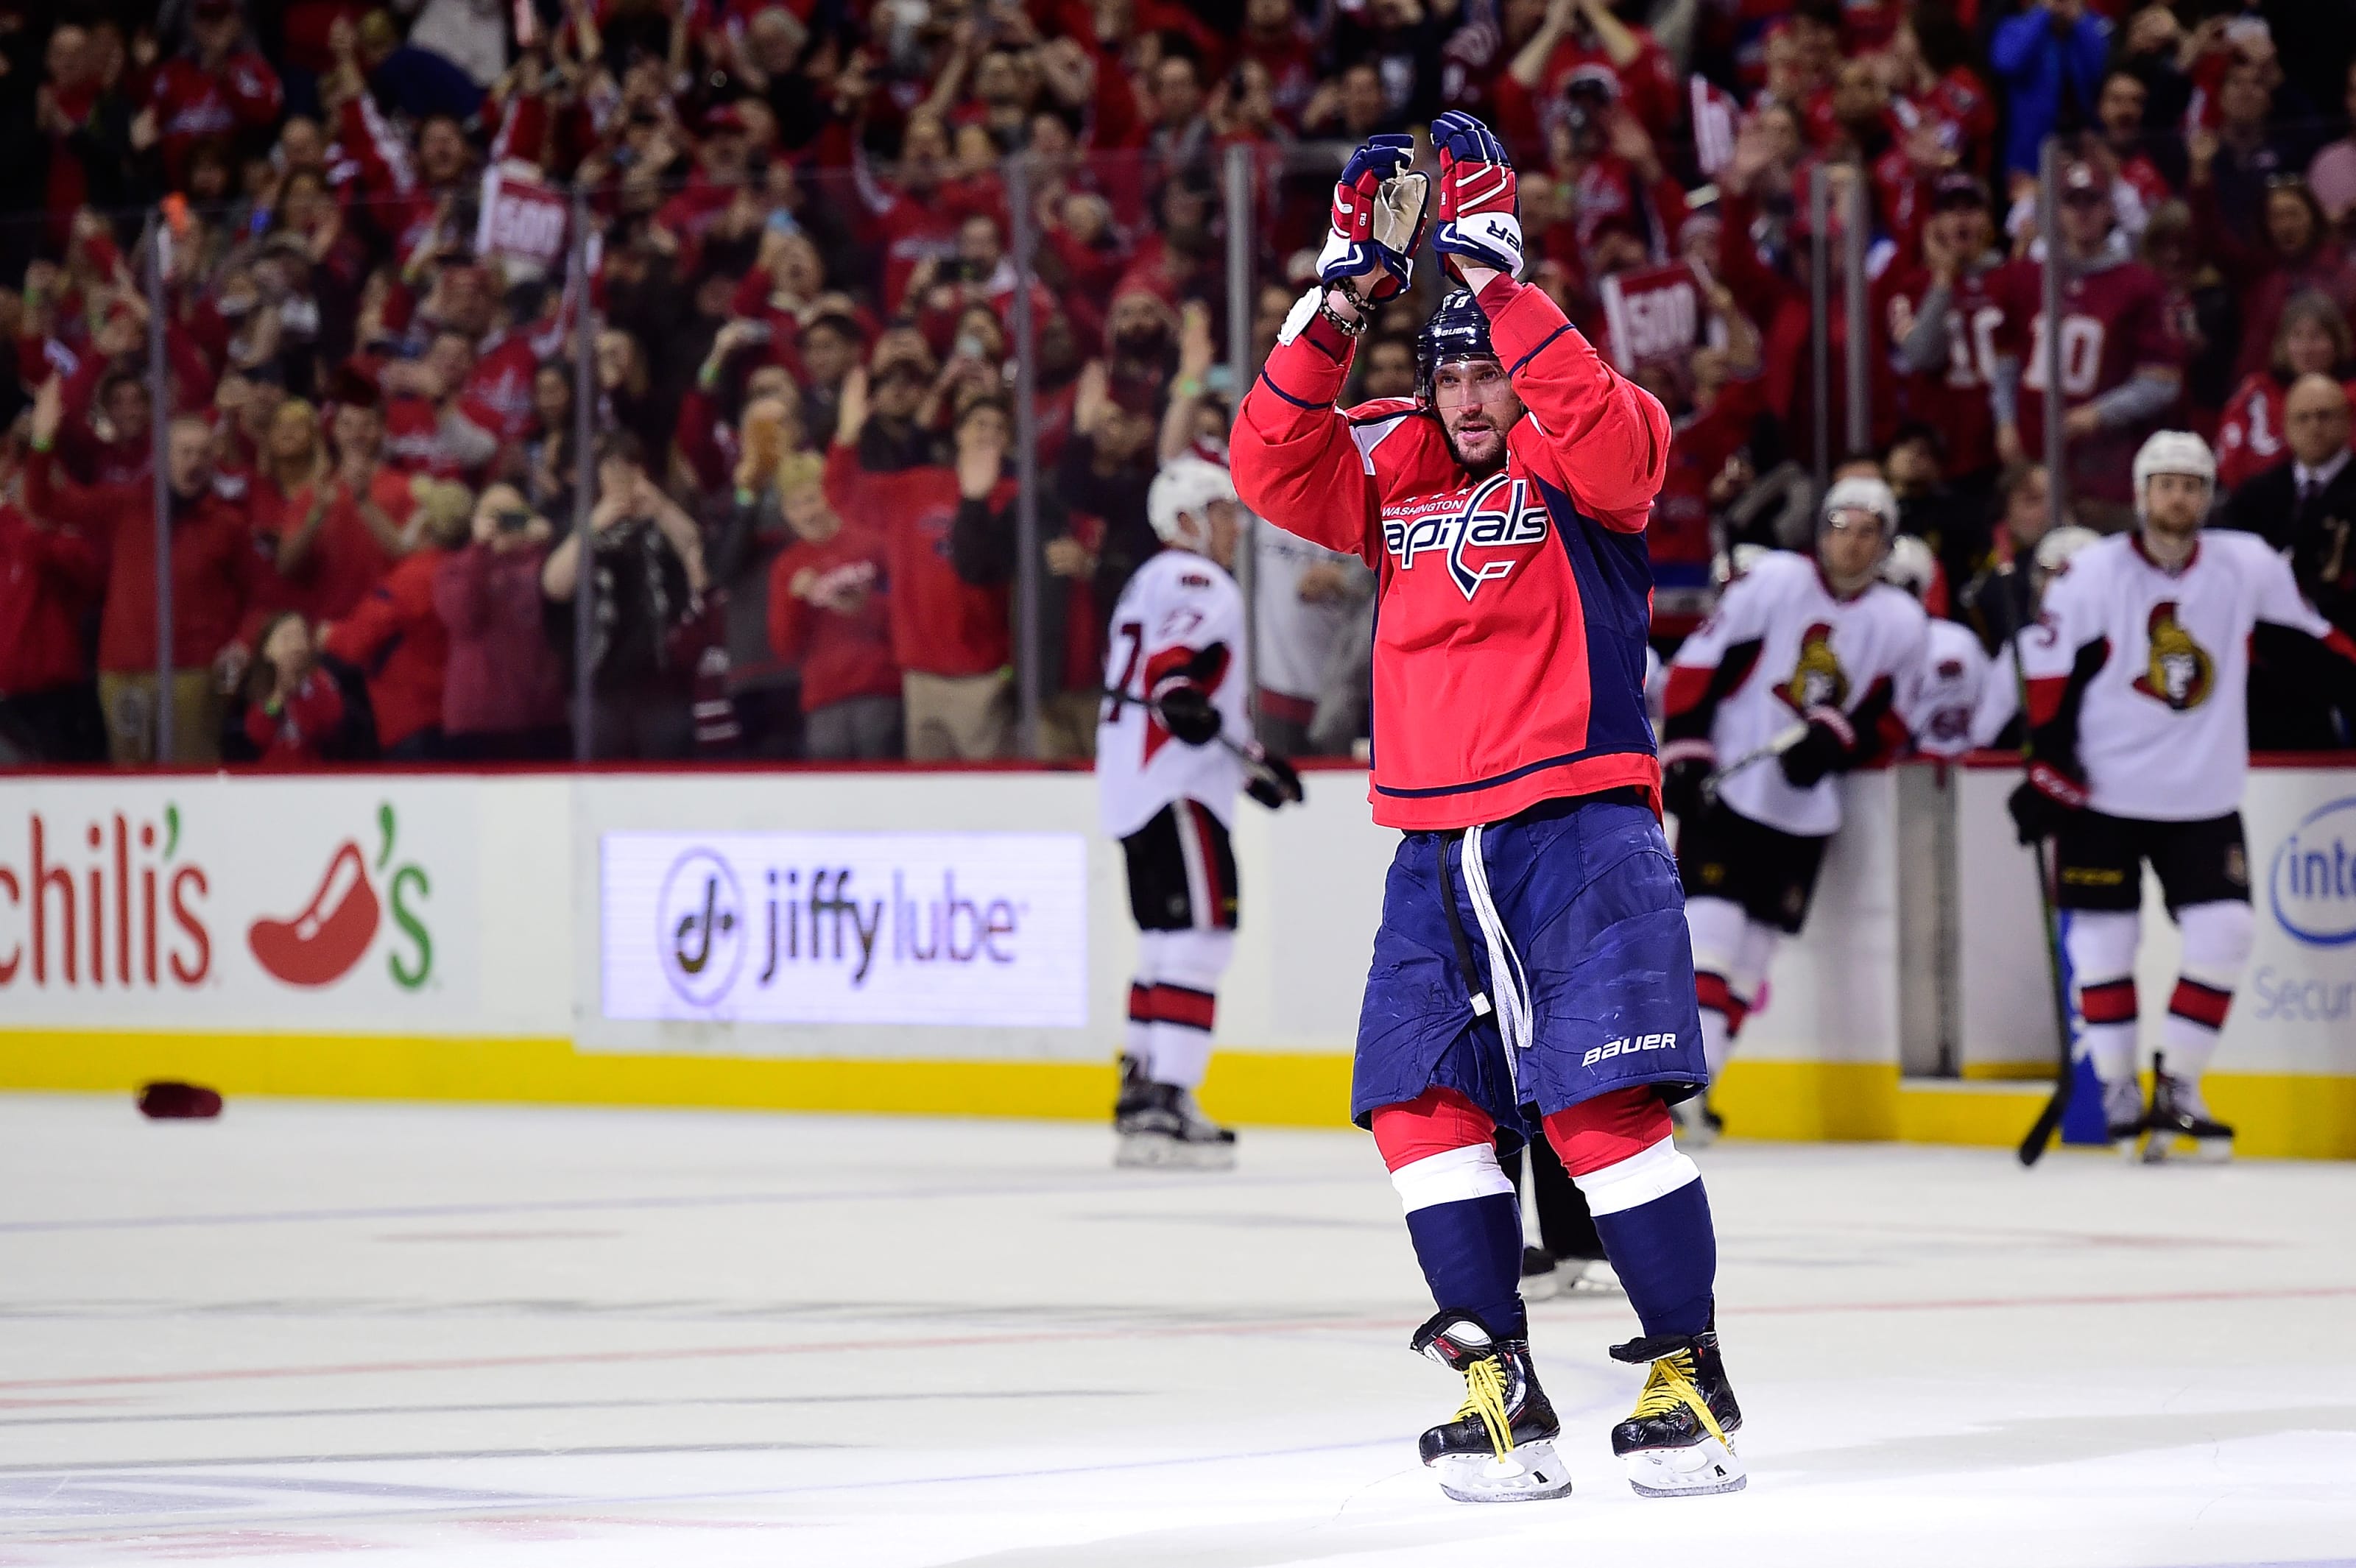 Some Of The Washington Capitals Best Moments From The 2010's - Page 2